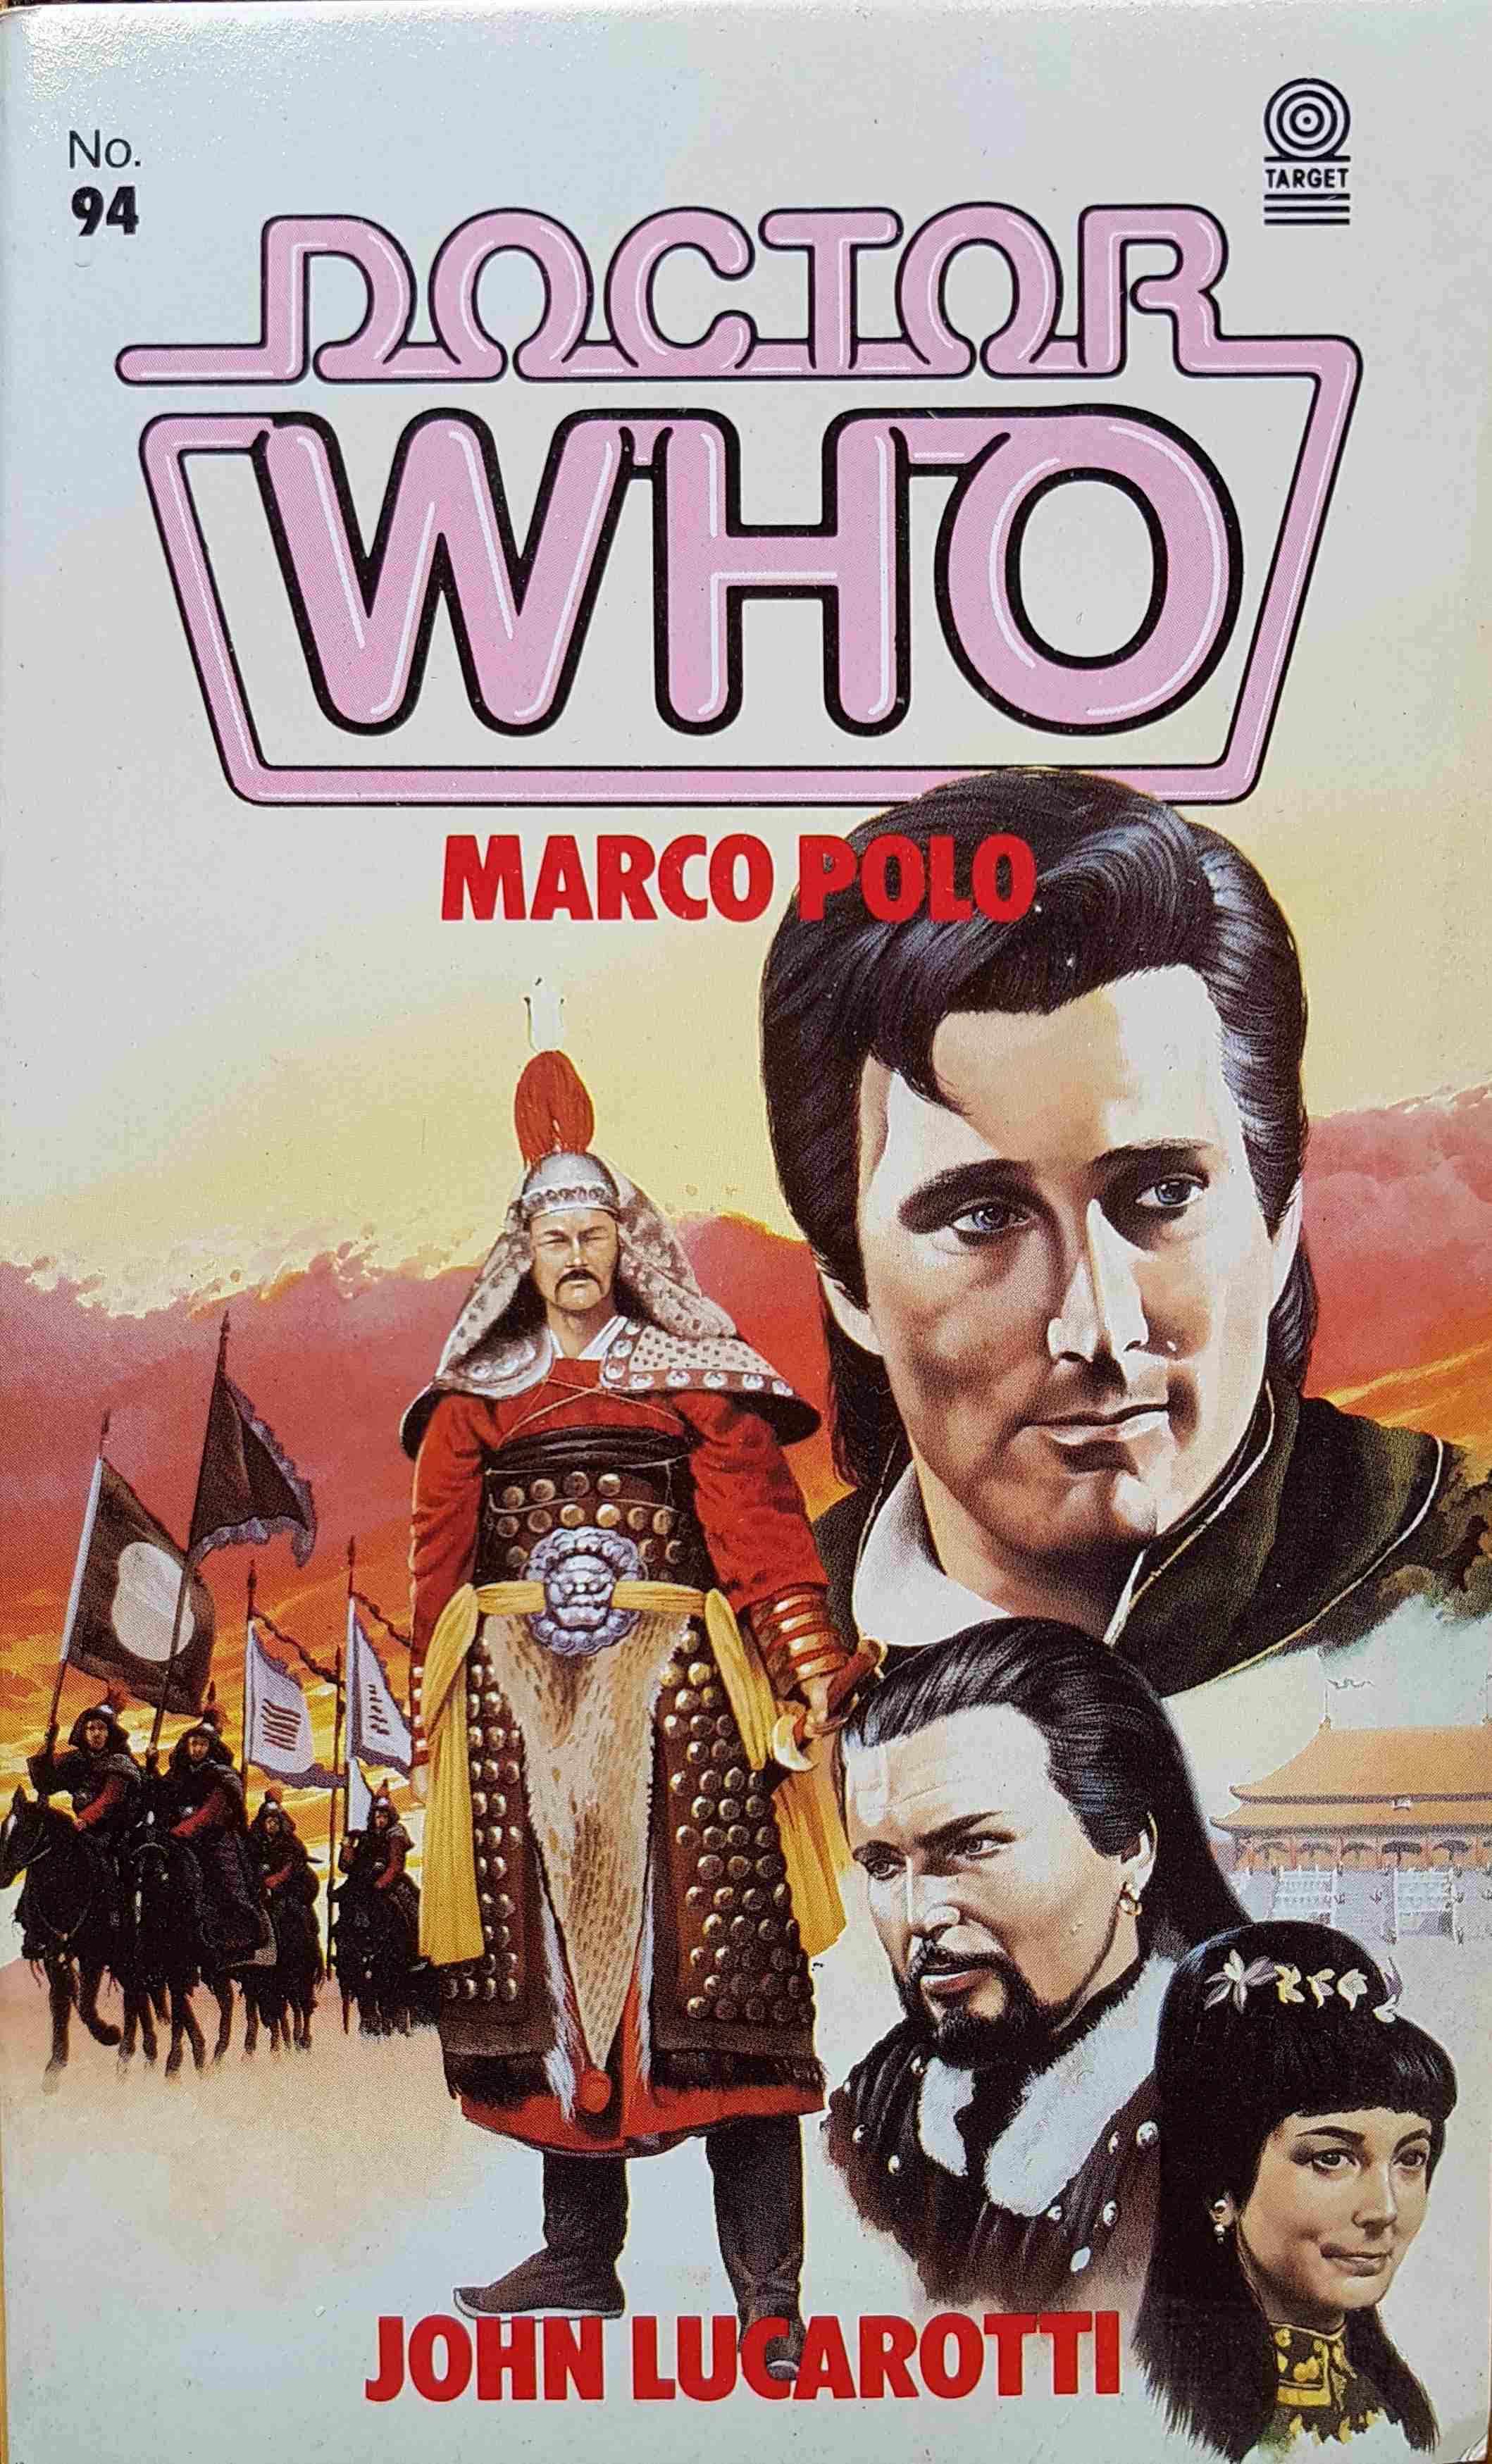 Picture of 0-426-19967-7 Doctor Who - Marco Polo by artist John Lucarotti from the BBC records and Tapes library